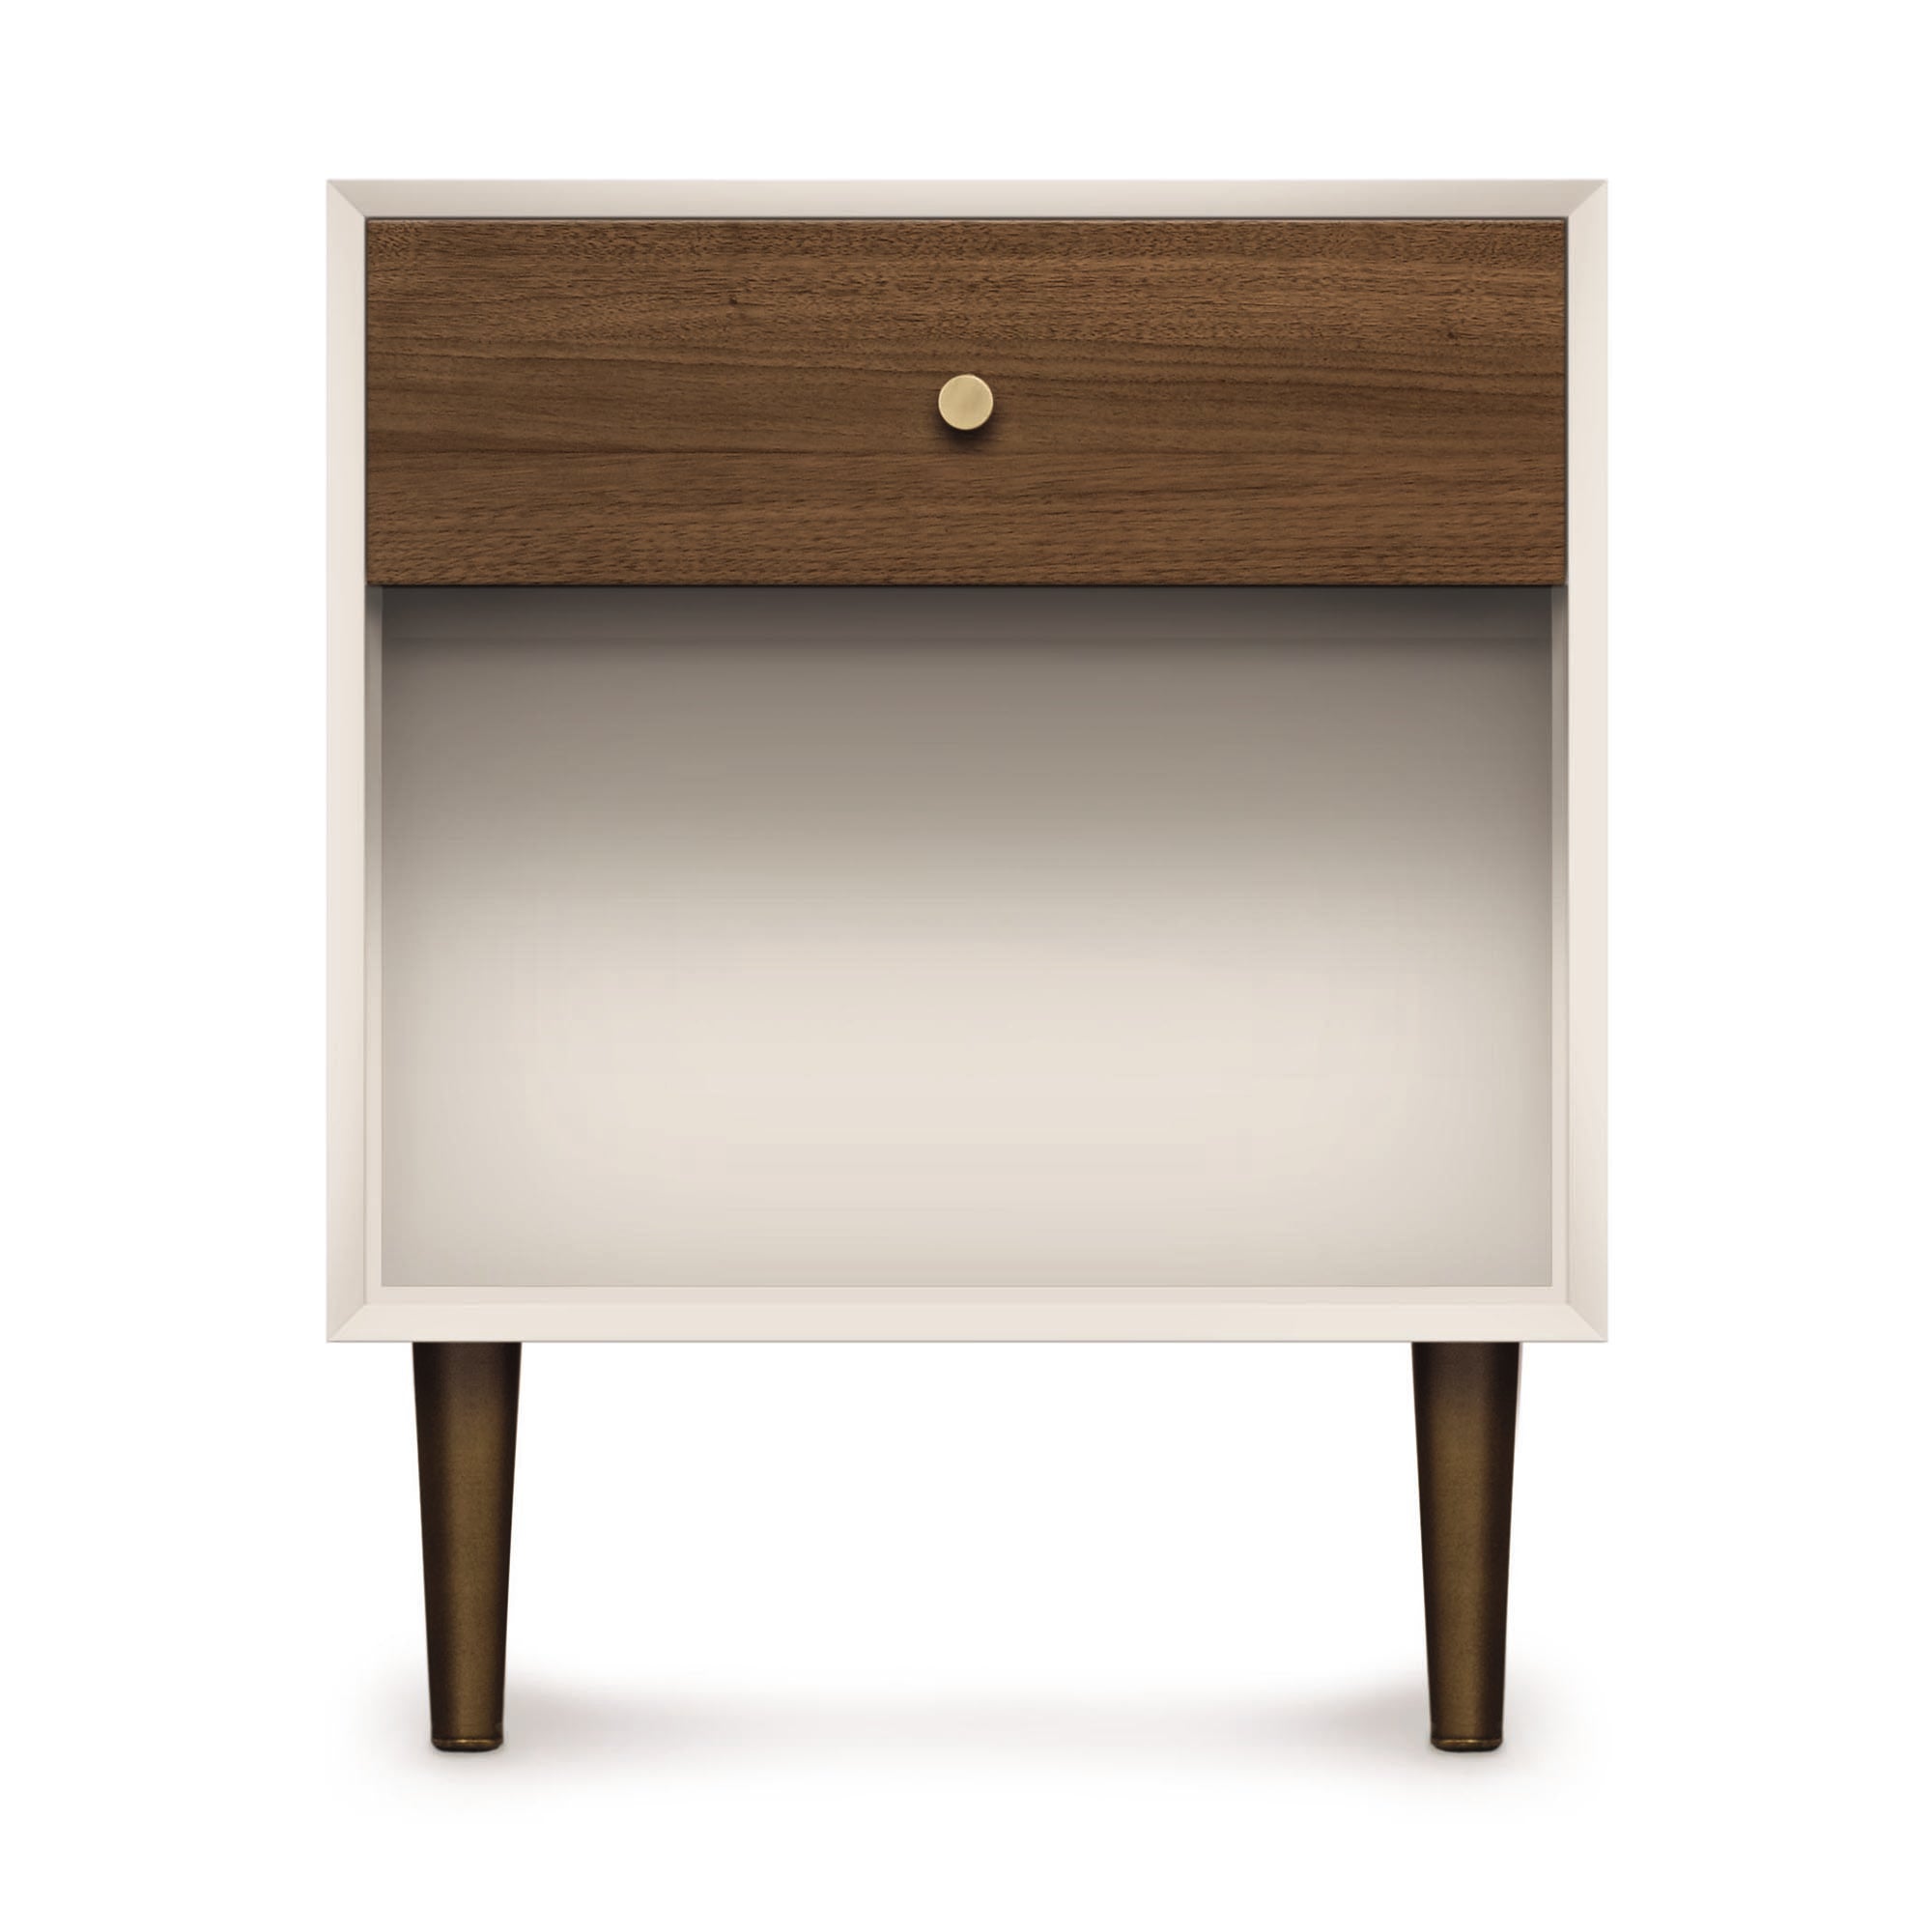 MiMo 1 Drawer Enclosed Shelf Nightstand